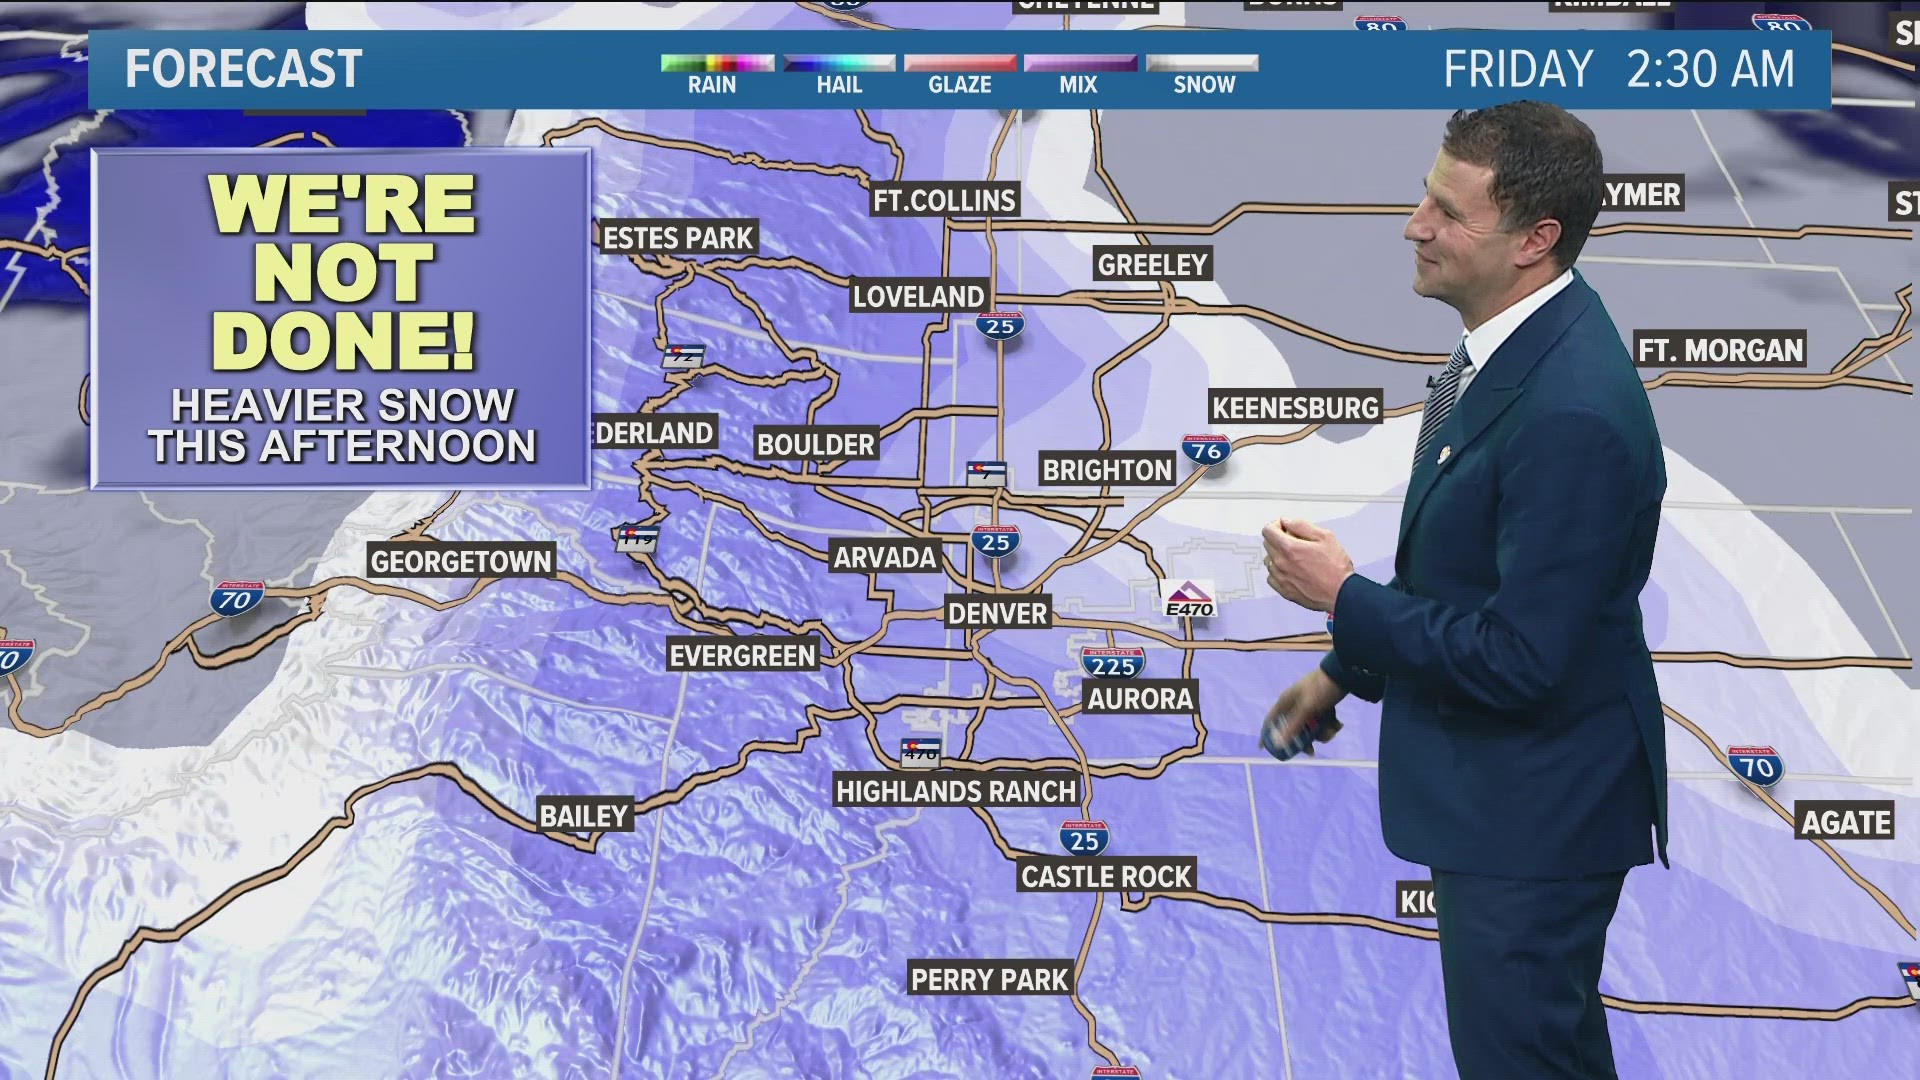 After a brief lull, heavy snow is expected to pick back up Thursday afternoon around Colorado.